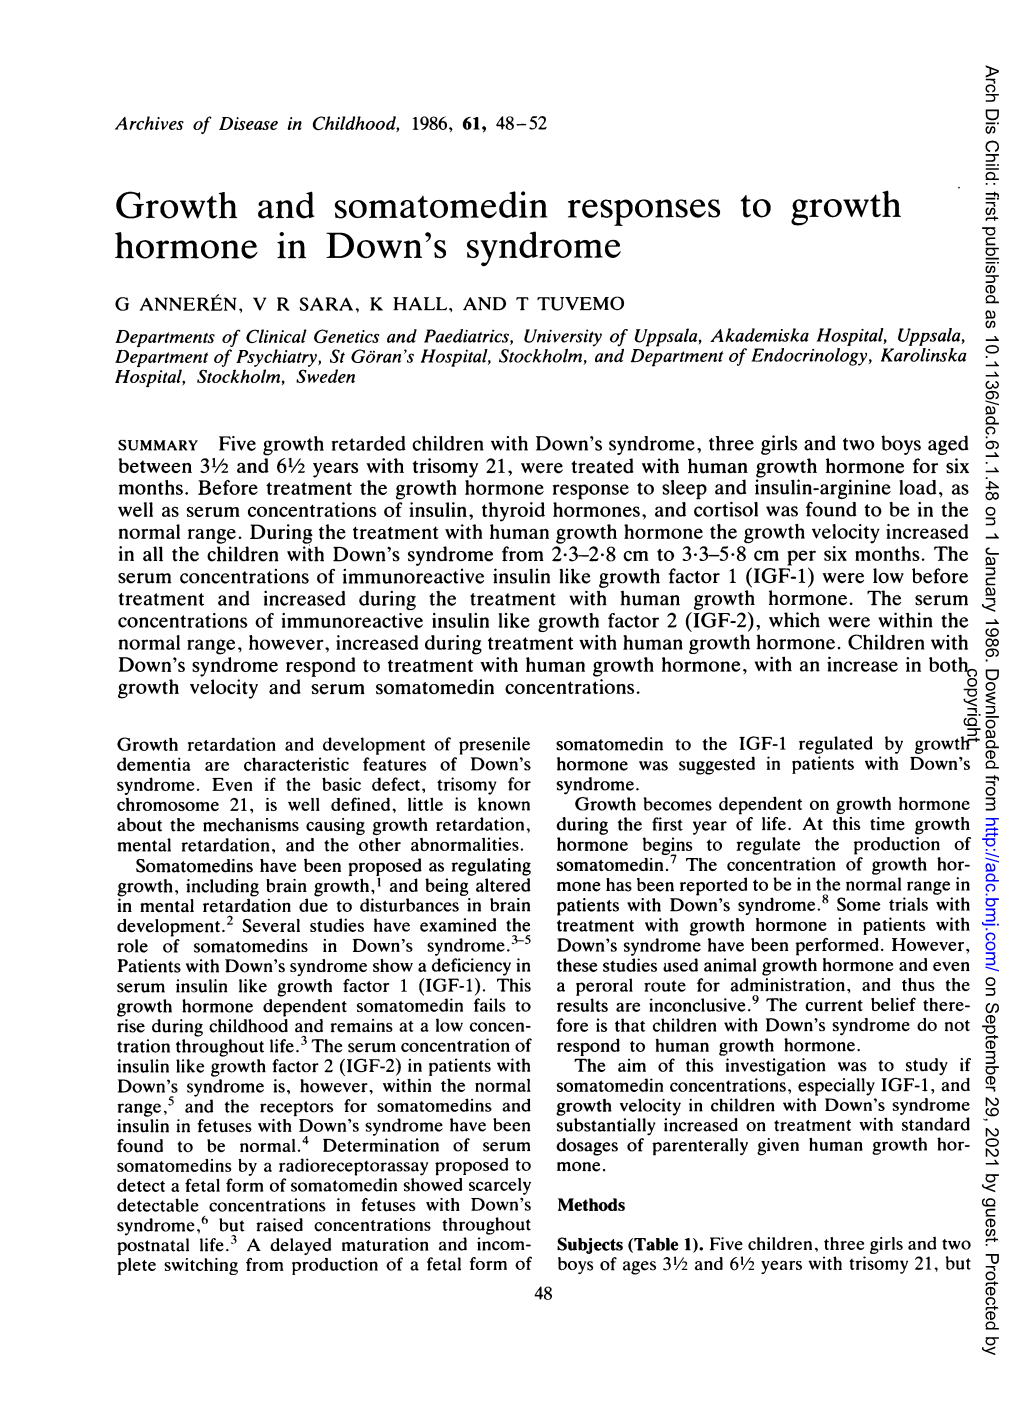 Growth and Somatomedin Responses to Growth Hormone in Down's Syndrome